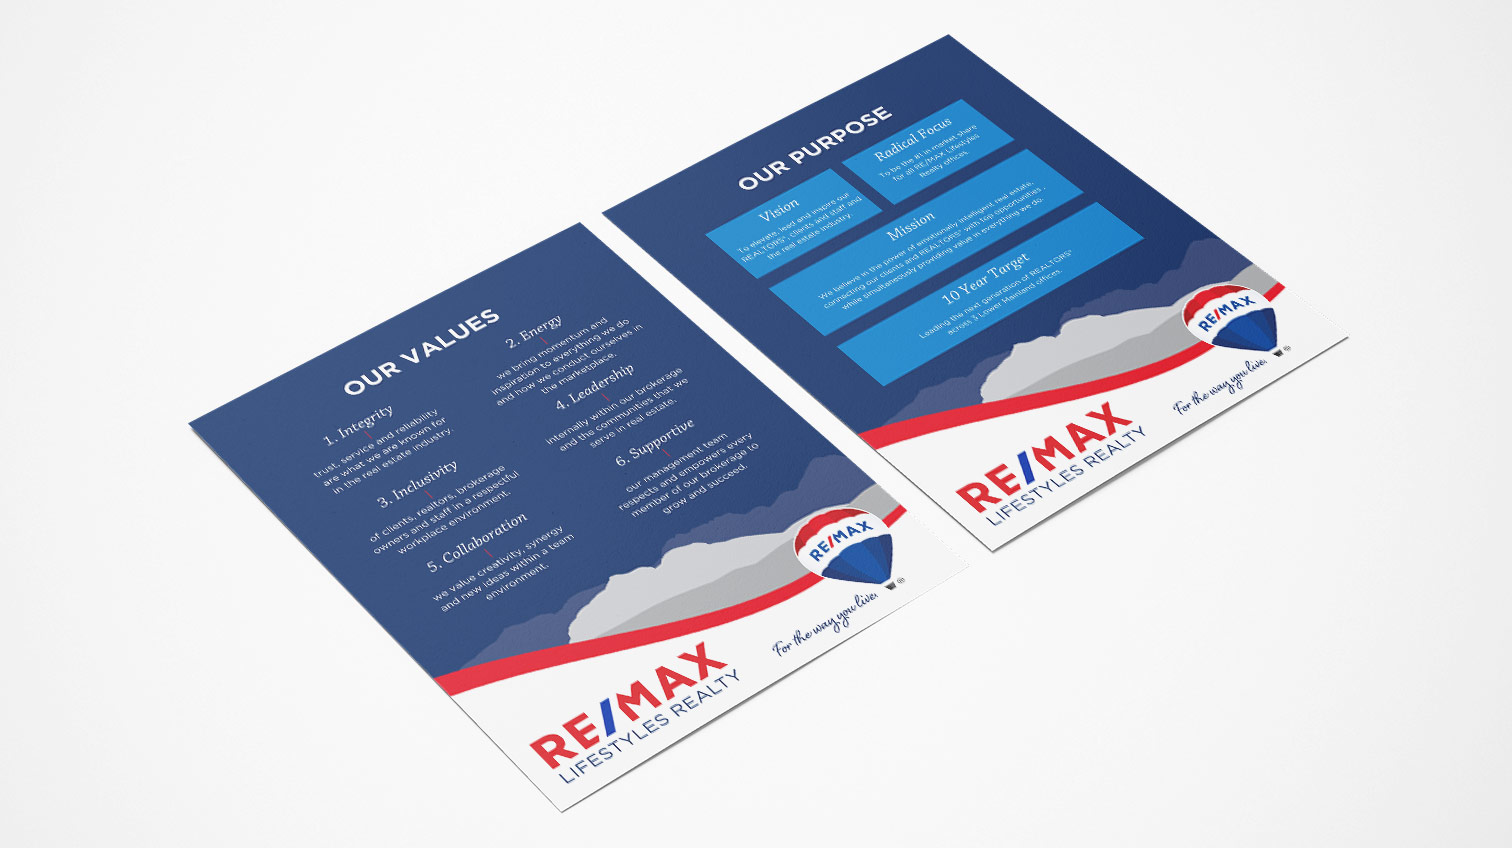 RE/MAX brand purpose and values on paper, front and back - White Canvas Design